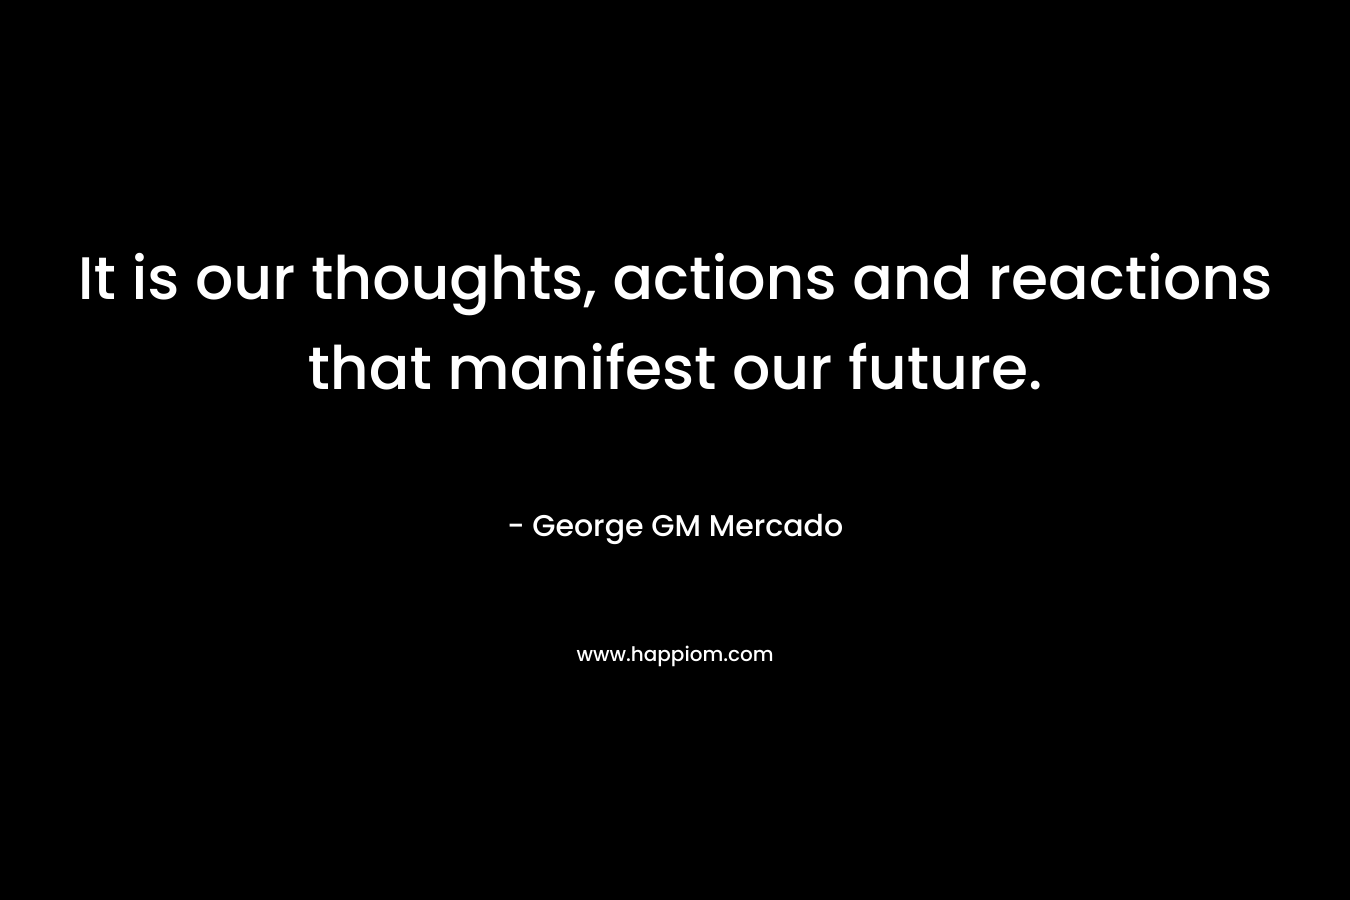 It is our thoughts, actions and reactions that manifest our future. – George GM Mercado